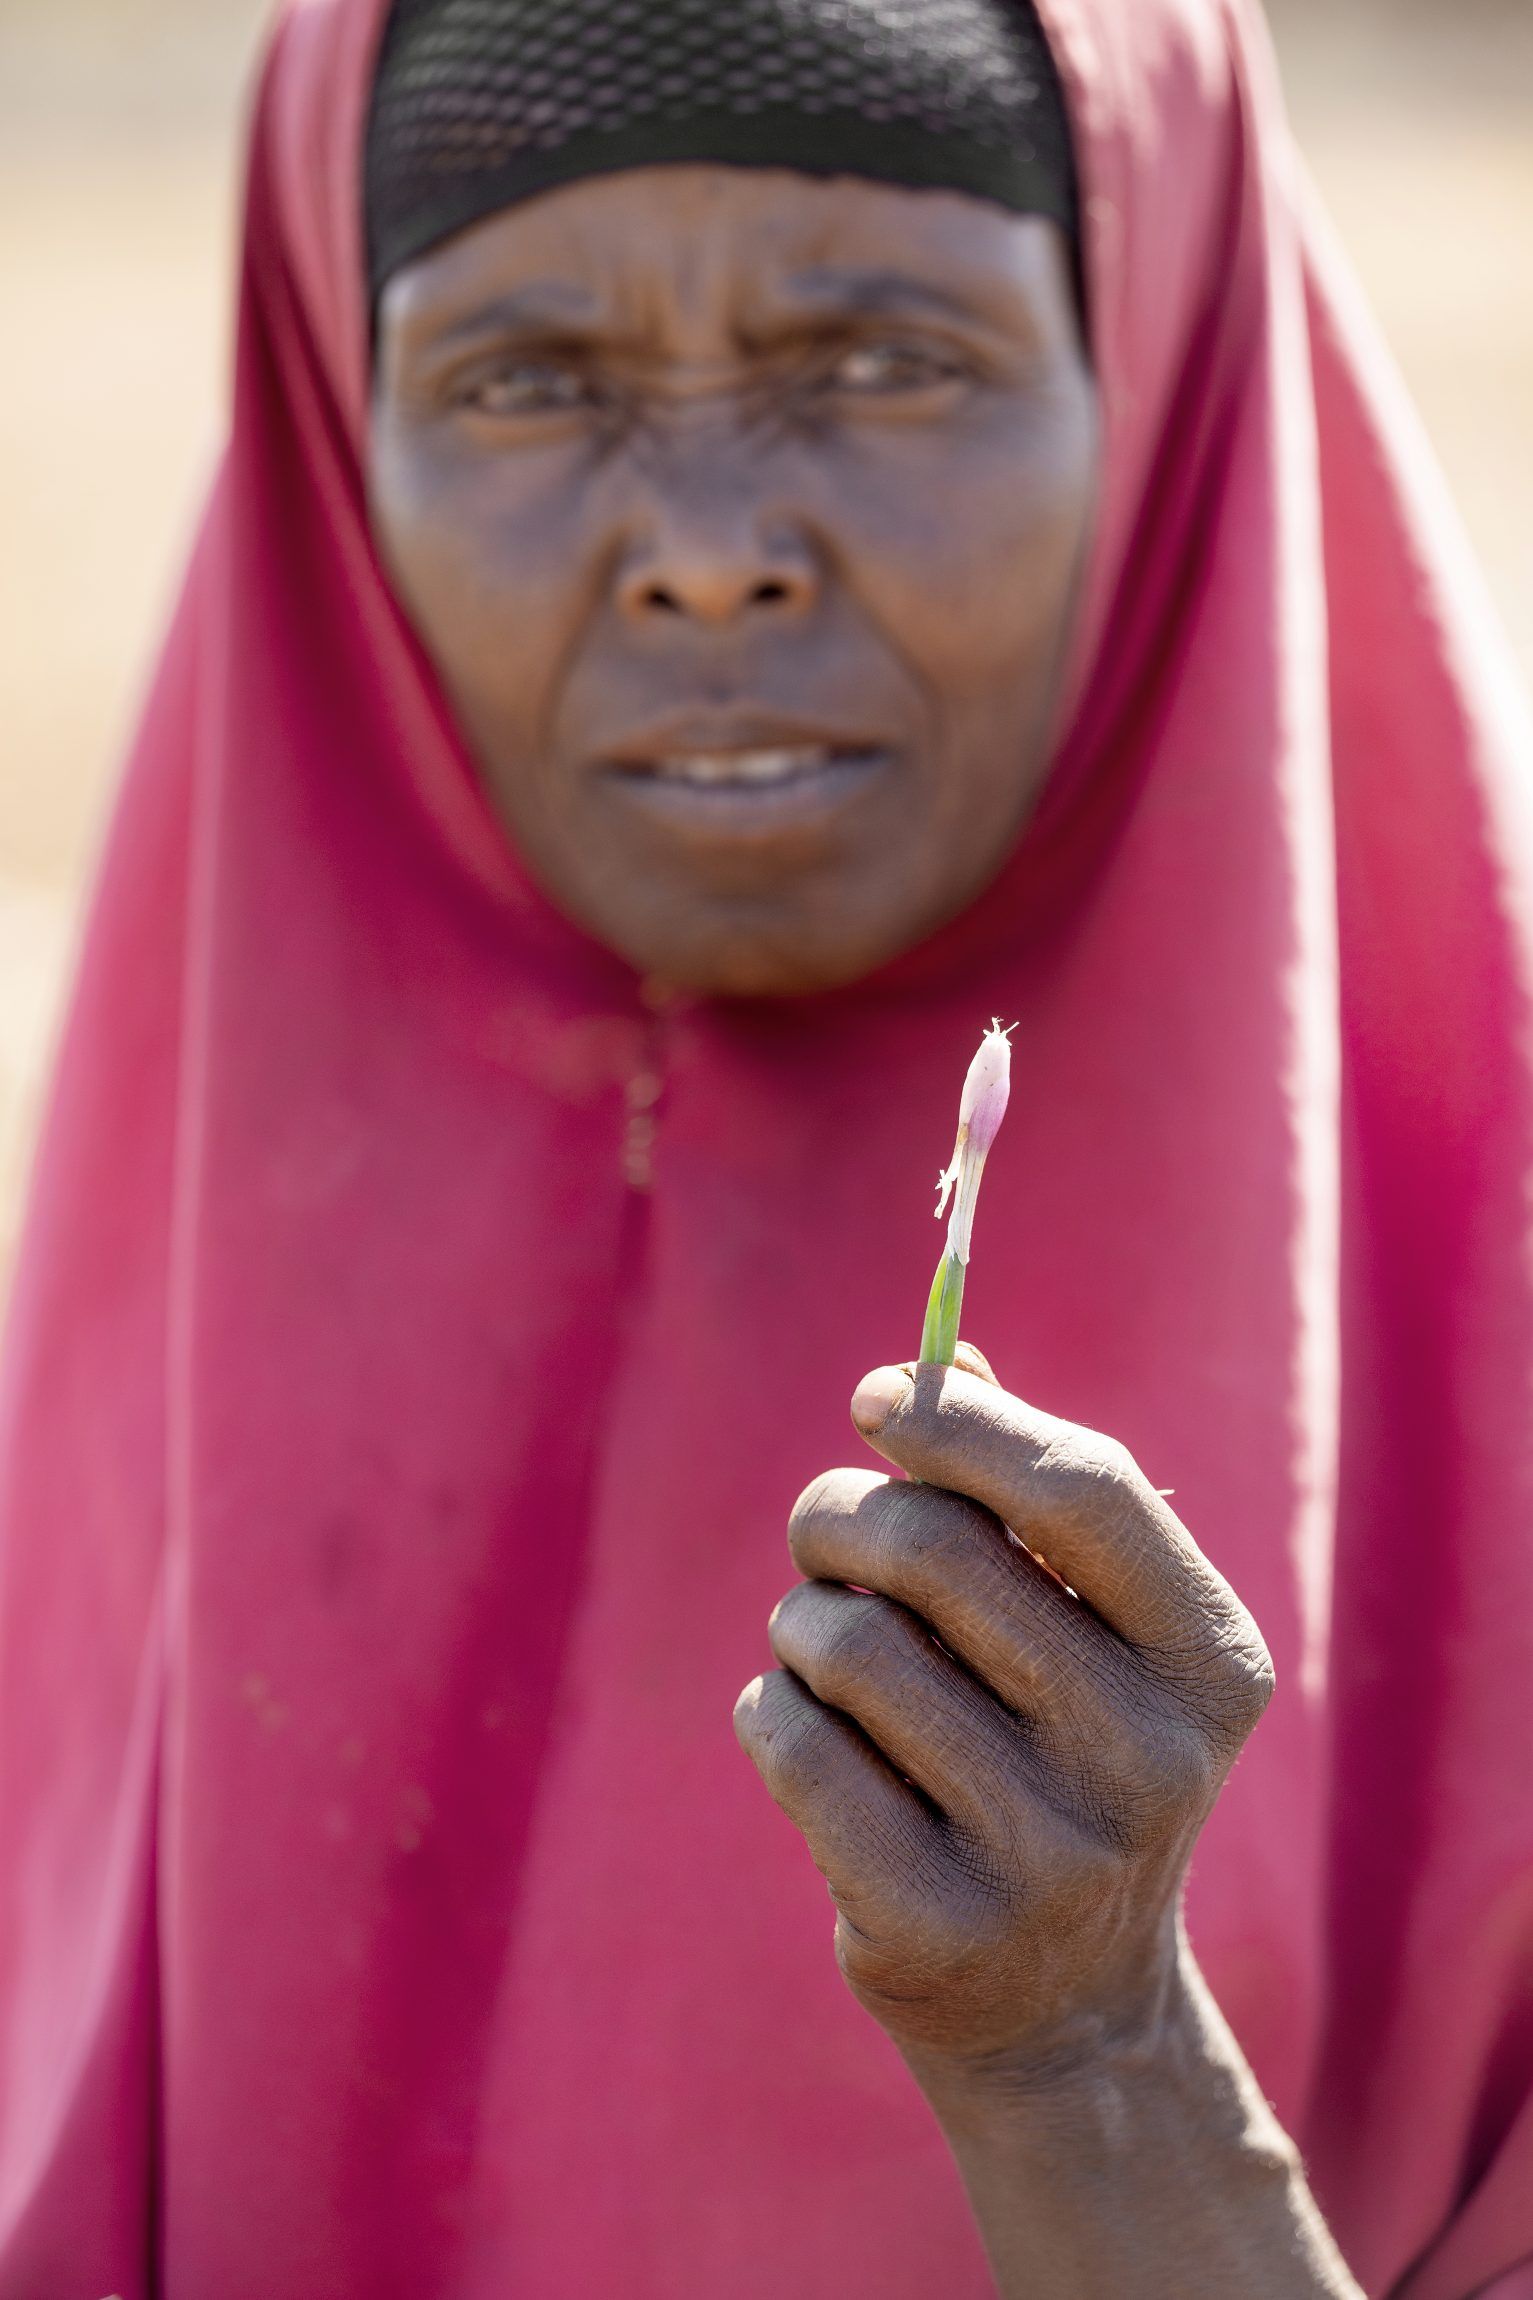 The woman Rabla from Ethiopia holds af sprout in her hand.